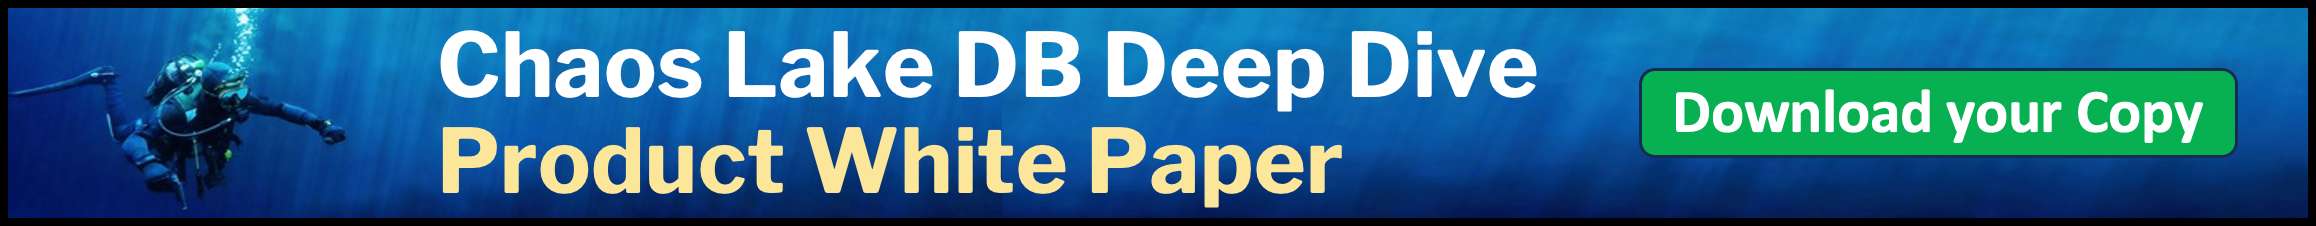 Chaos LakeDB Deep Dive Product White Paper: download your copy.